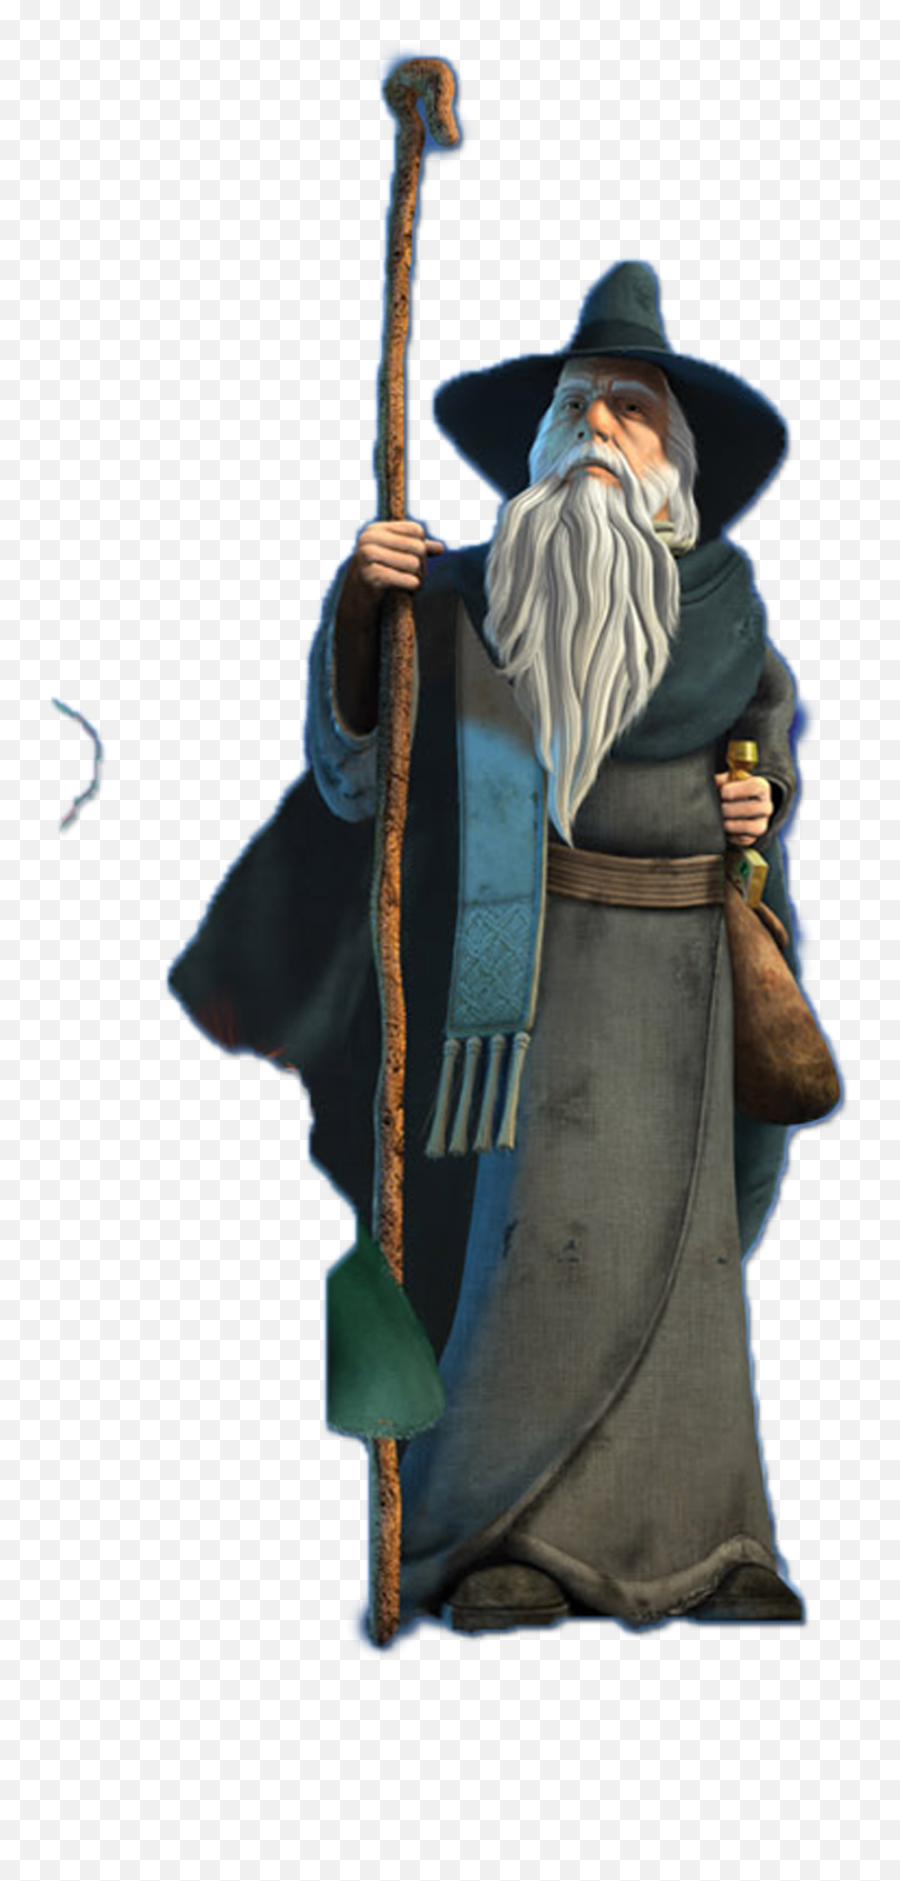 Lord Of The Rings Gandalf Png Image - Lord Of The Rings Gandalf Png,Gandalf Png